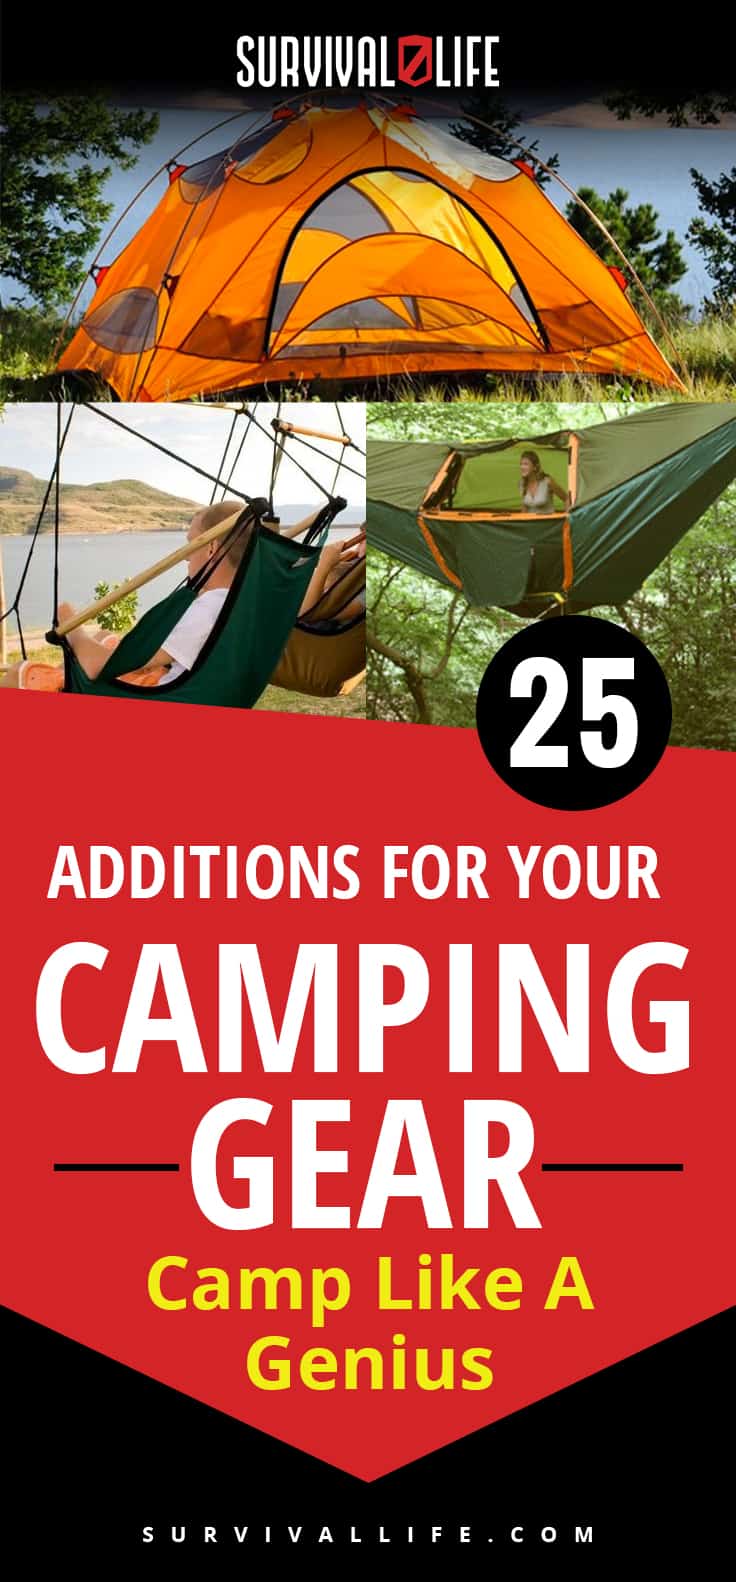 Camping Gears | Camp Like A Genius With These Additions | https://survivallife.com/camping-gears-should-have/